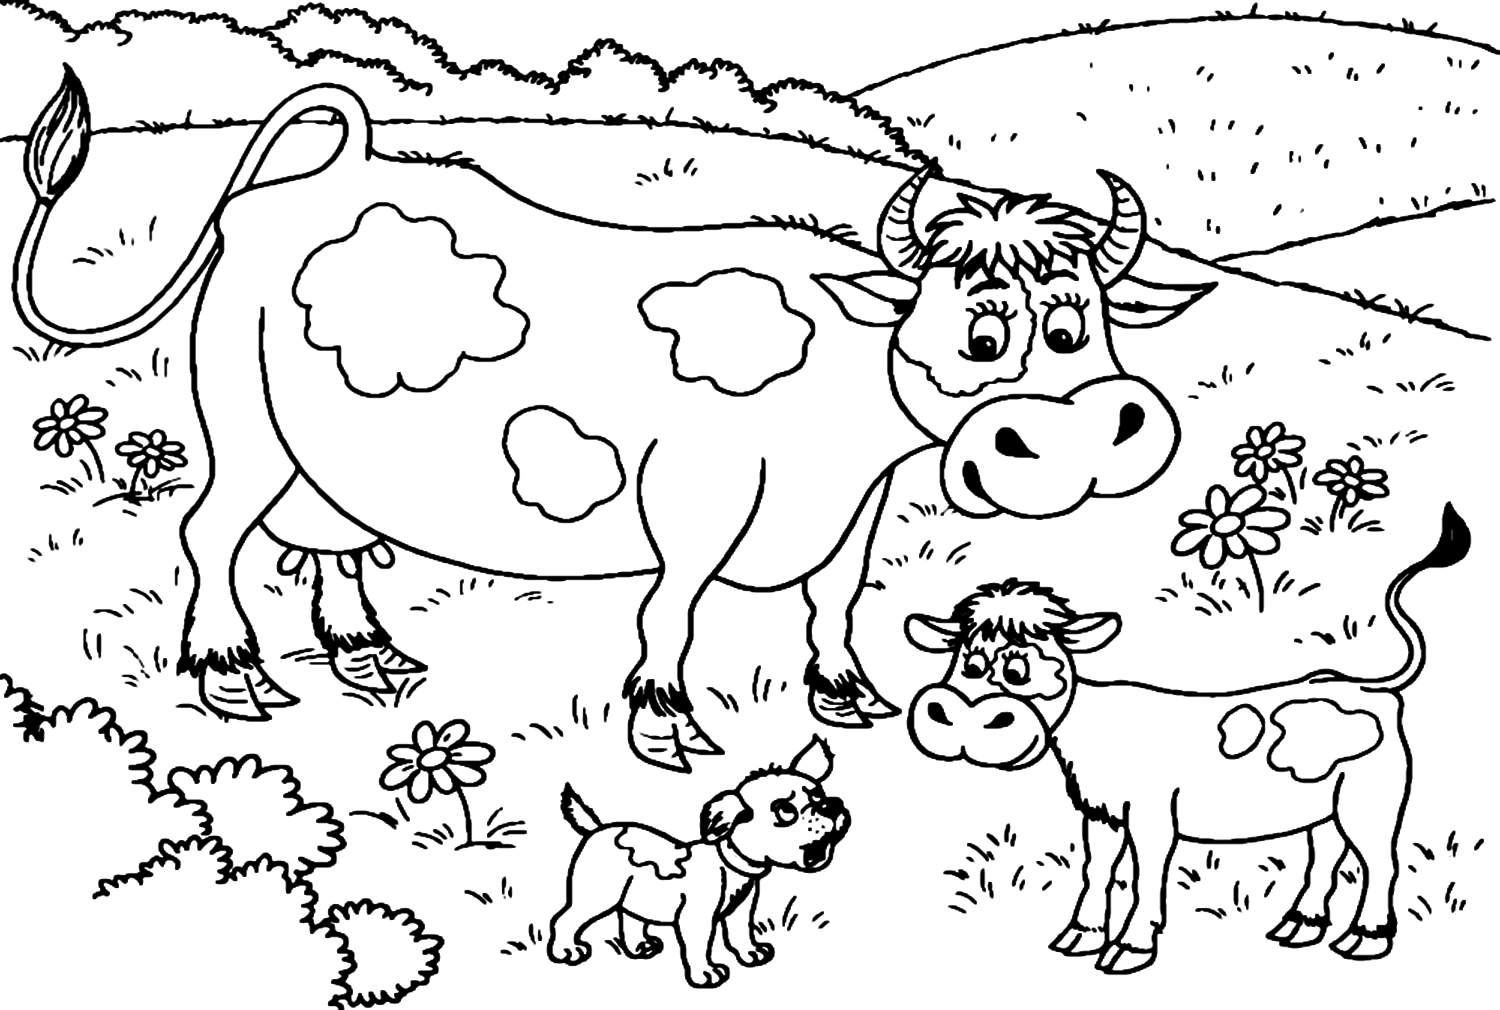 Mother Cow And Calf On The Grass Coloring Page - Free Printable ...